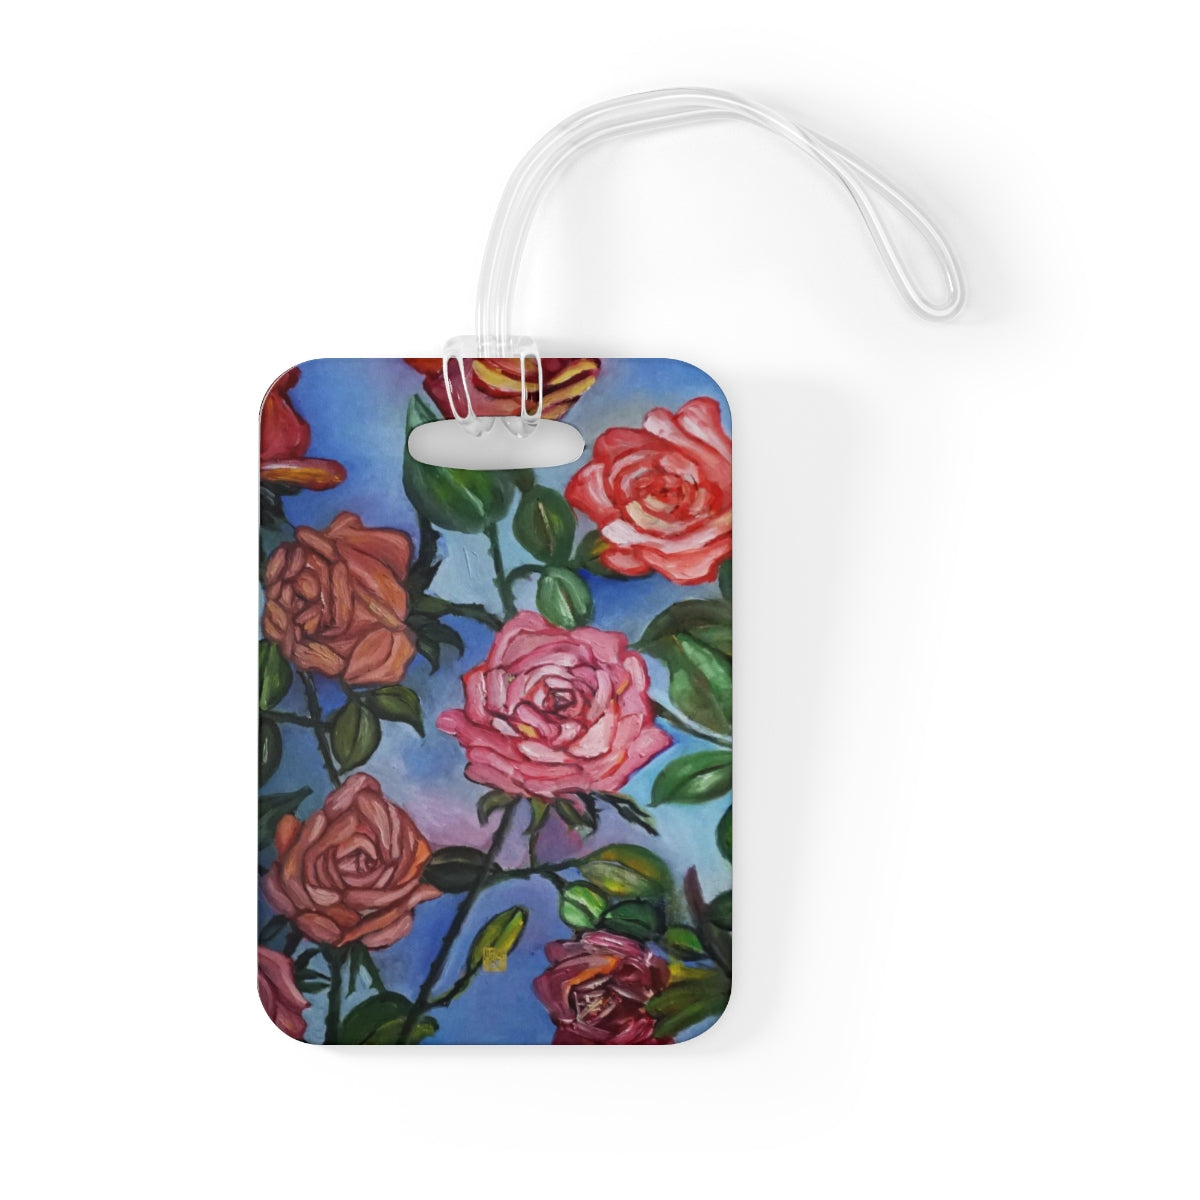 Pink Roses in Blue Sky, Rose Floral, Glossy Lightweight Plastic Bag Tag, Made in USA - alicechanart